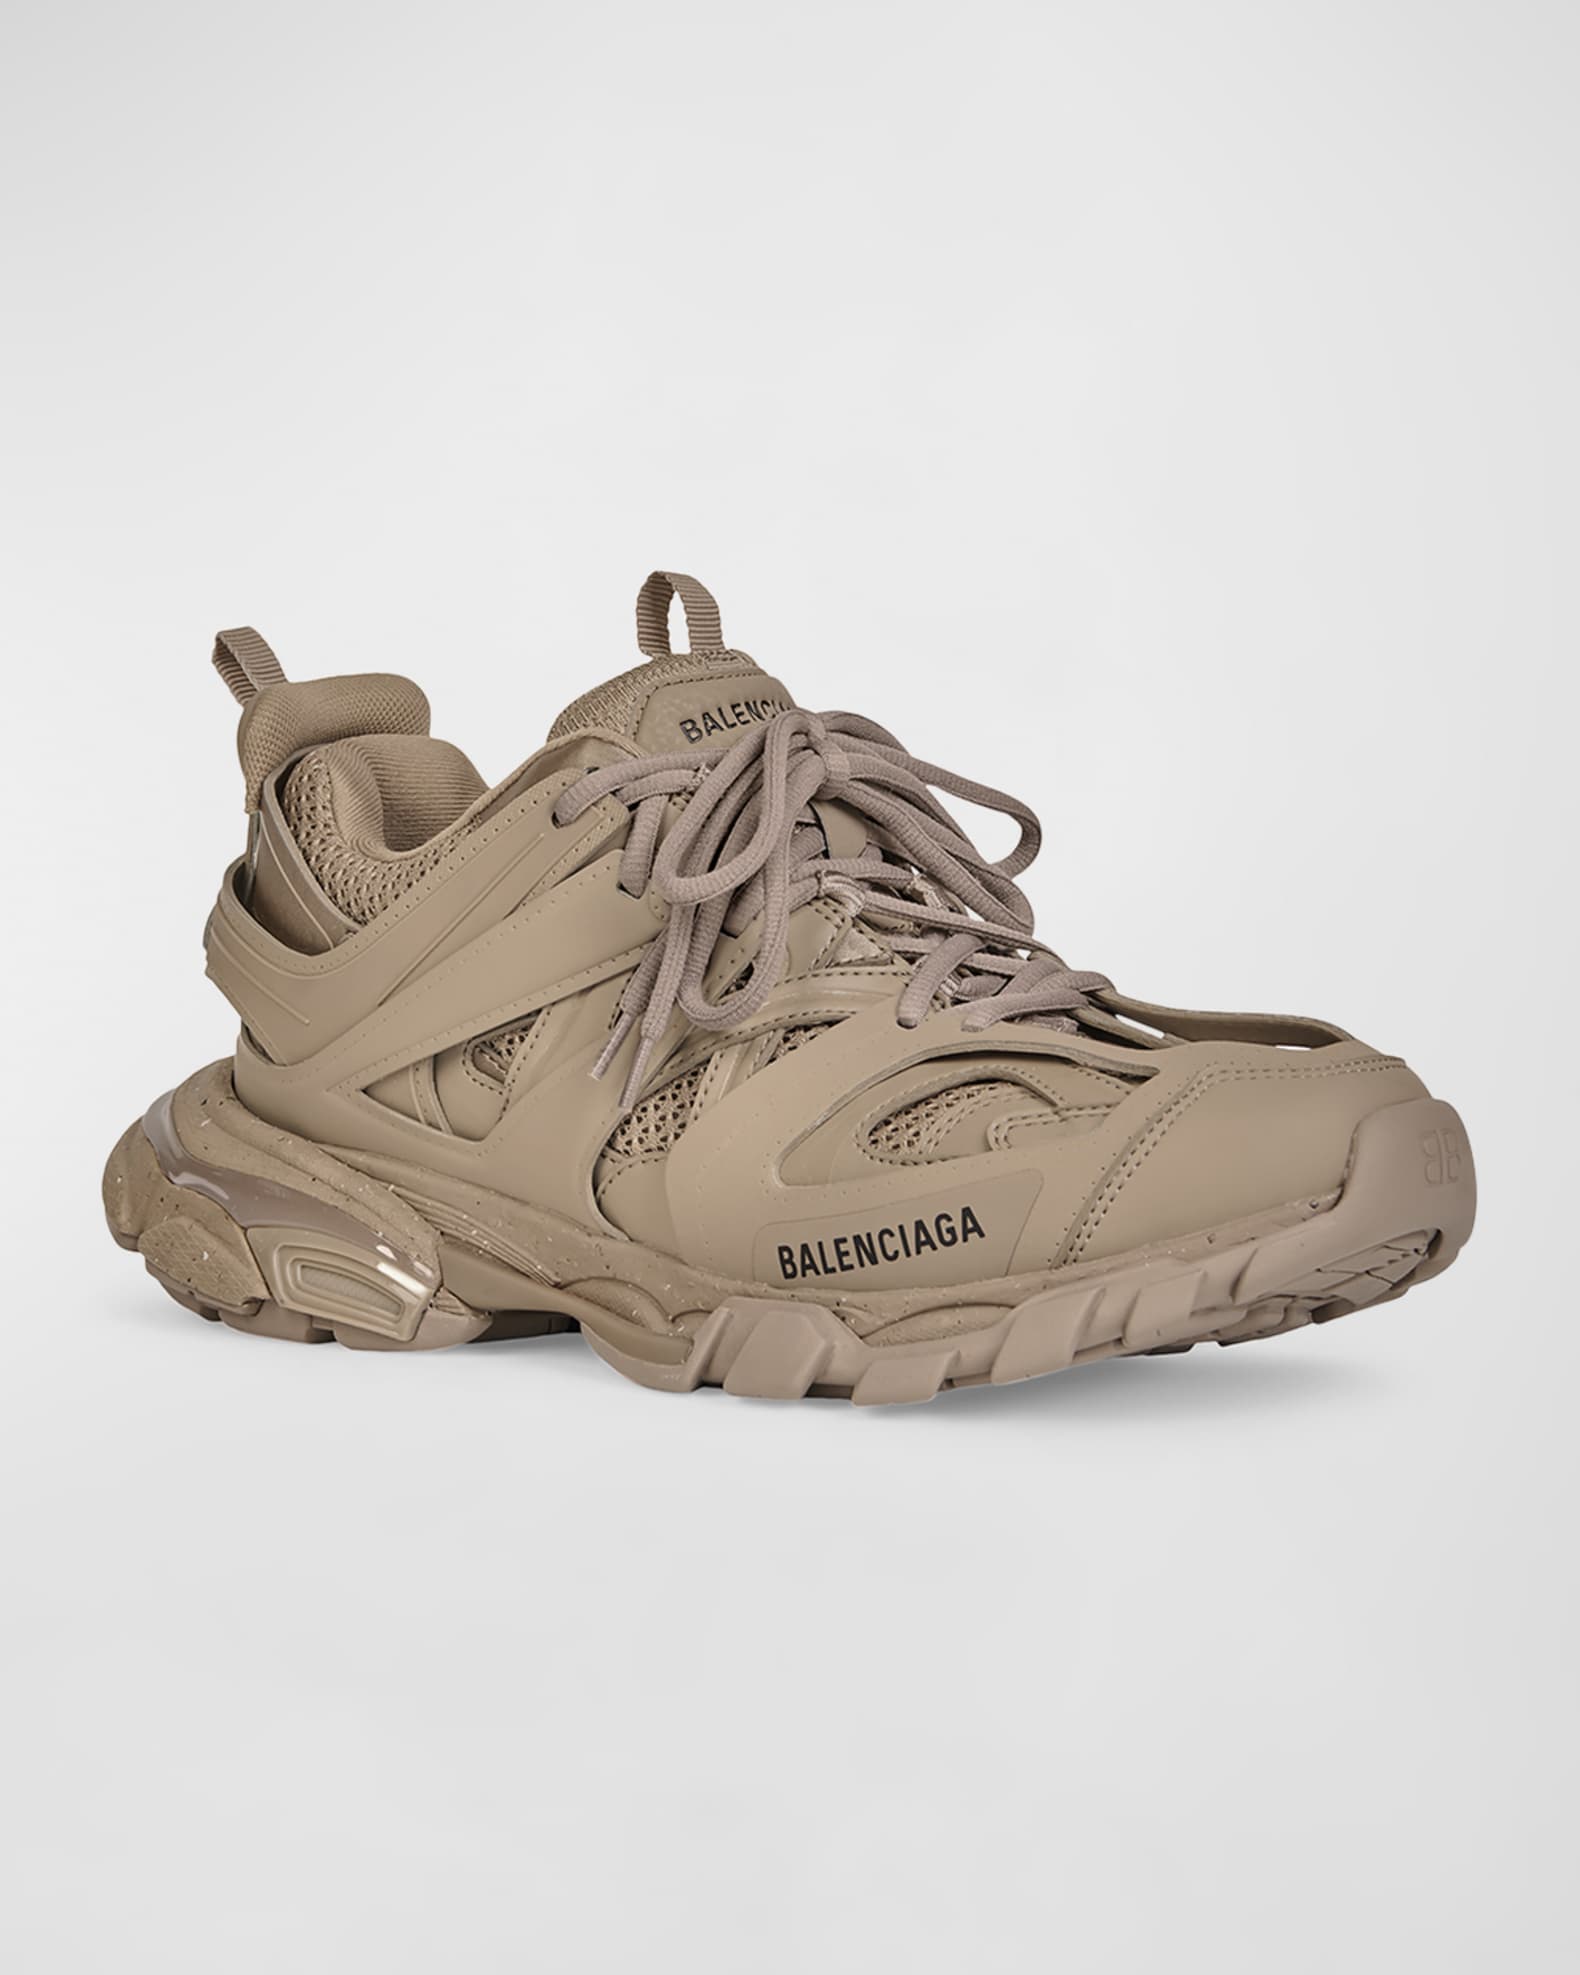 Materialisme Ny ankomst Ged Balenciaga Track Fashion Trainer Sneakers | Neiman Marcus